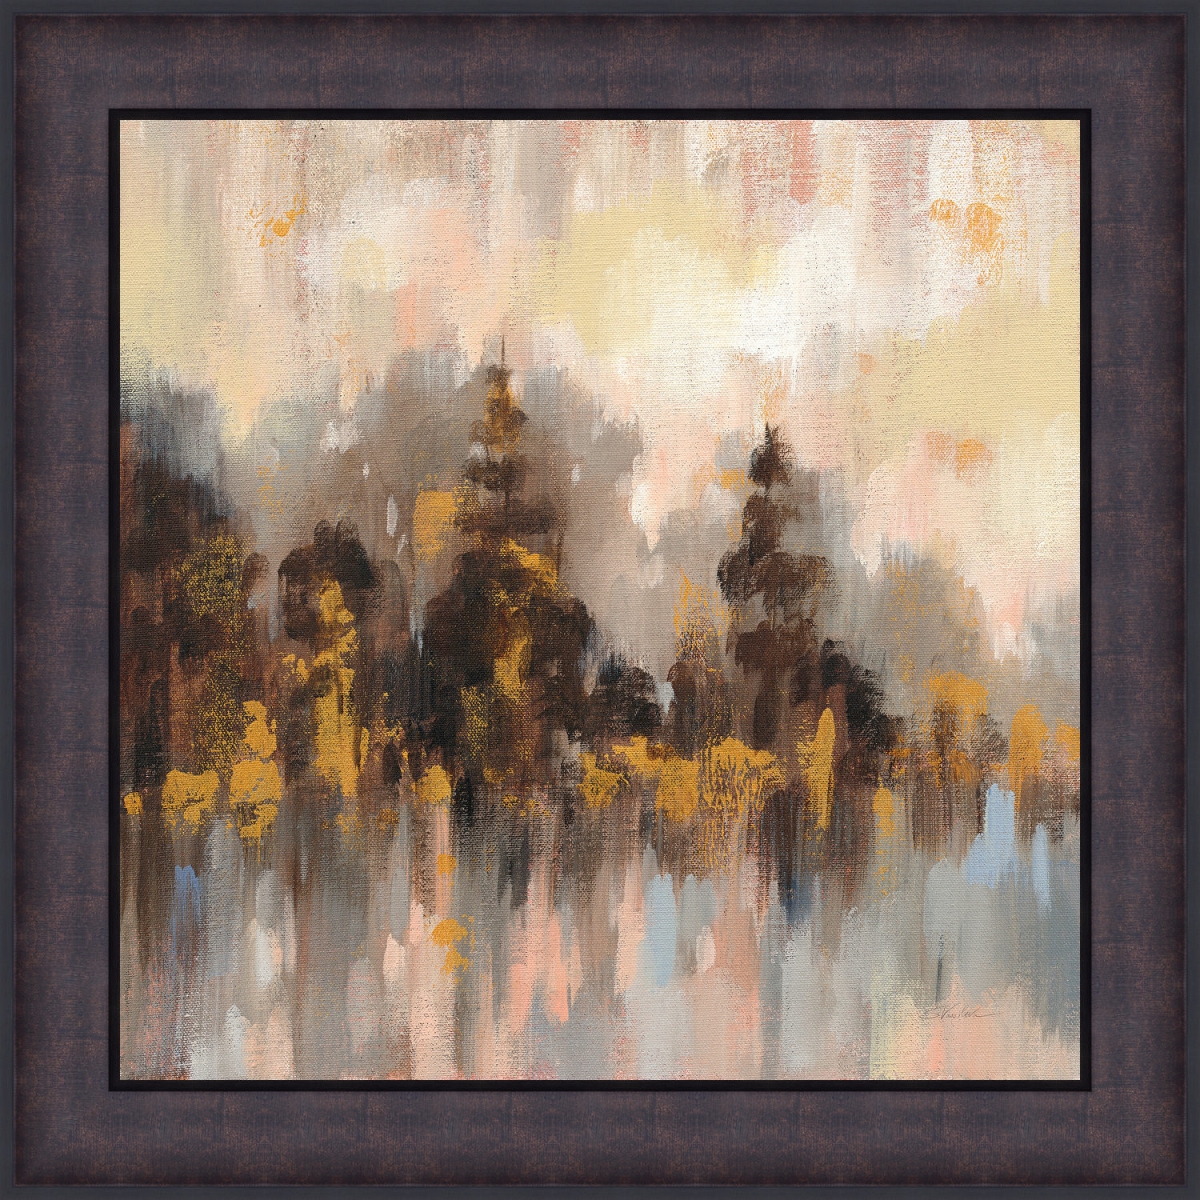 2362 23.5 X 23.5 In. Blushing Forest Ii Framed Textured Fine Art Print